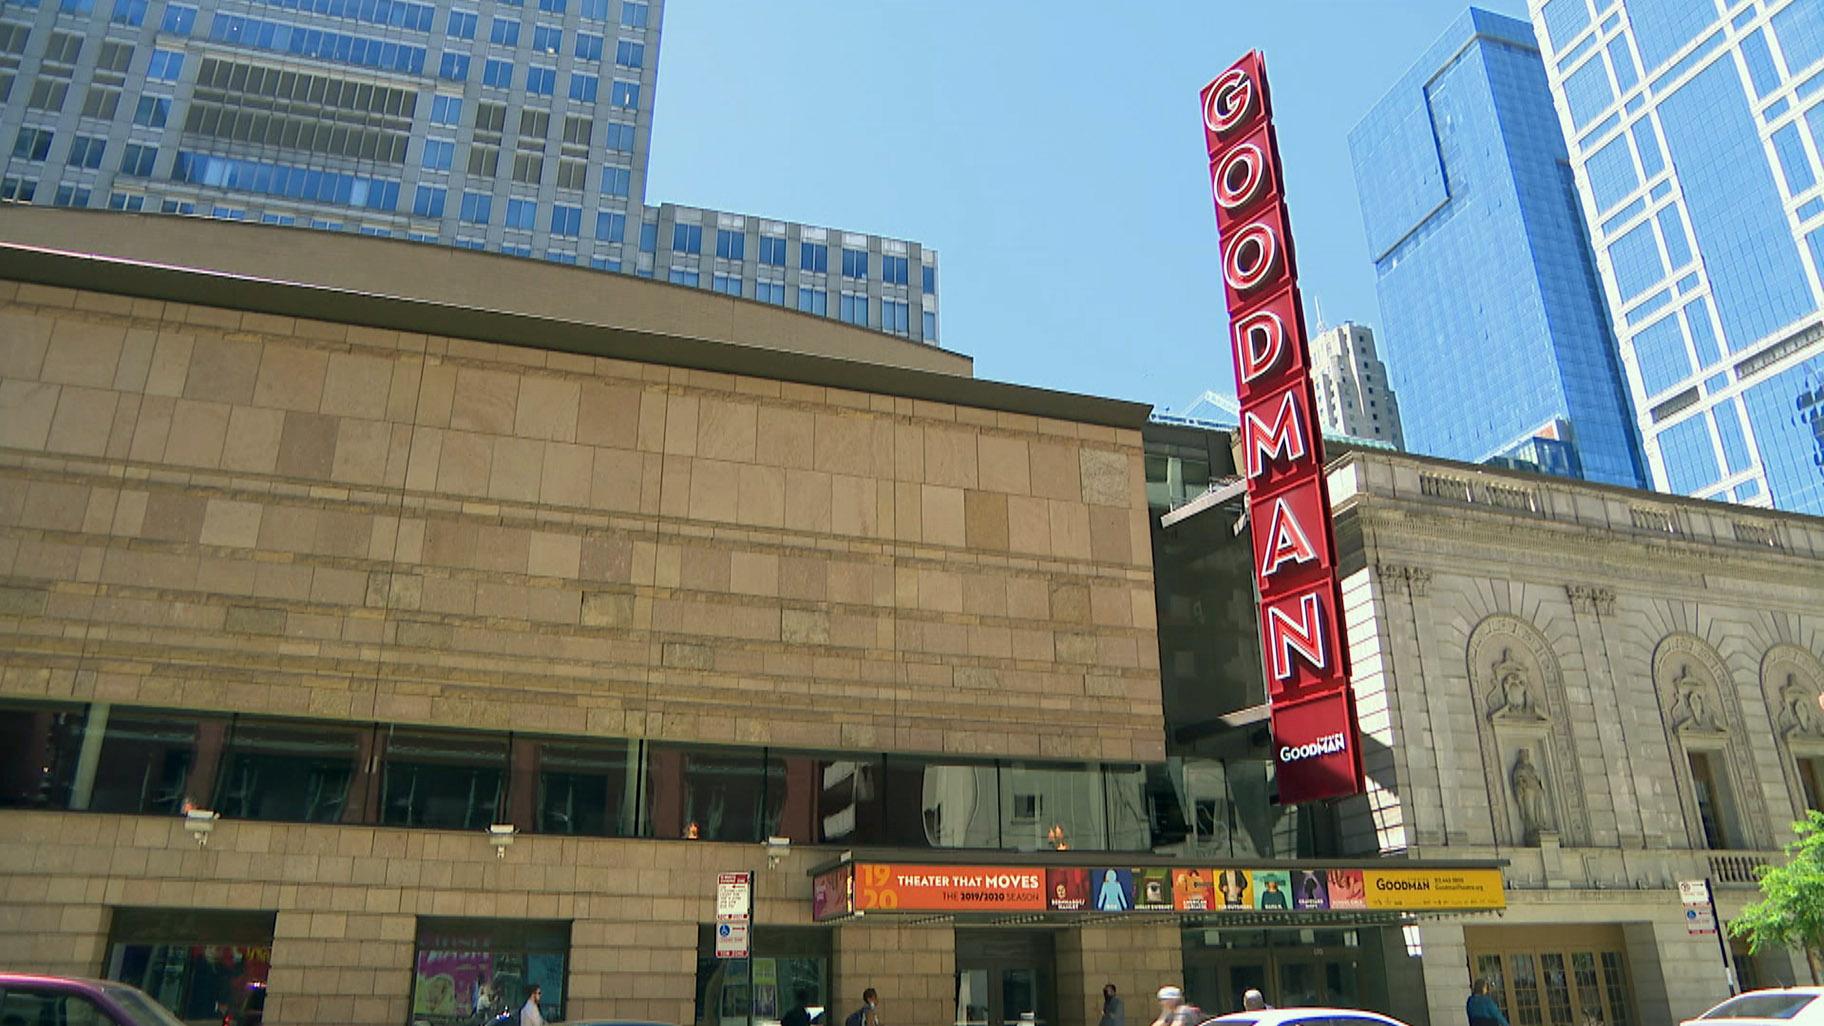 “Certain people relocated for various reasons, but there’s work here, and that’s what’s always made Chicago thrive,” said John Collins, general manager of the Goodman Theater, June 10, 2021. (WTTW News)